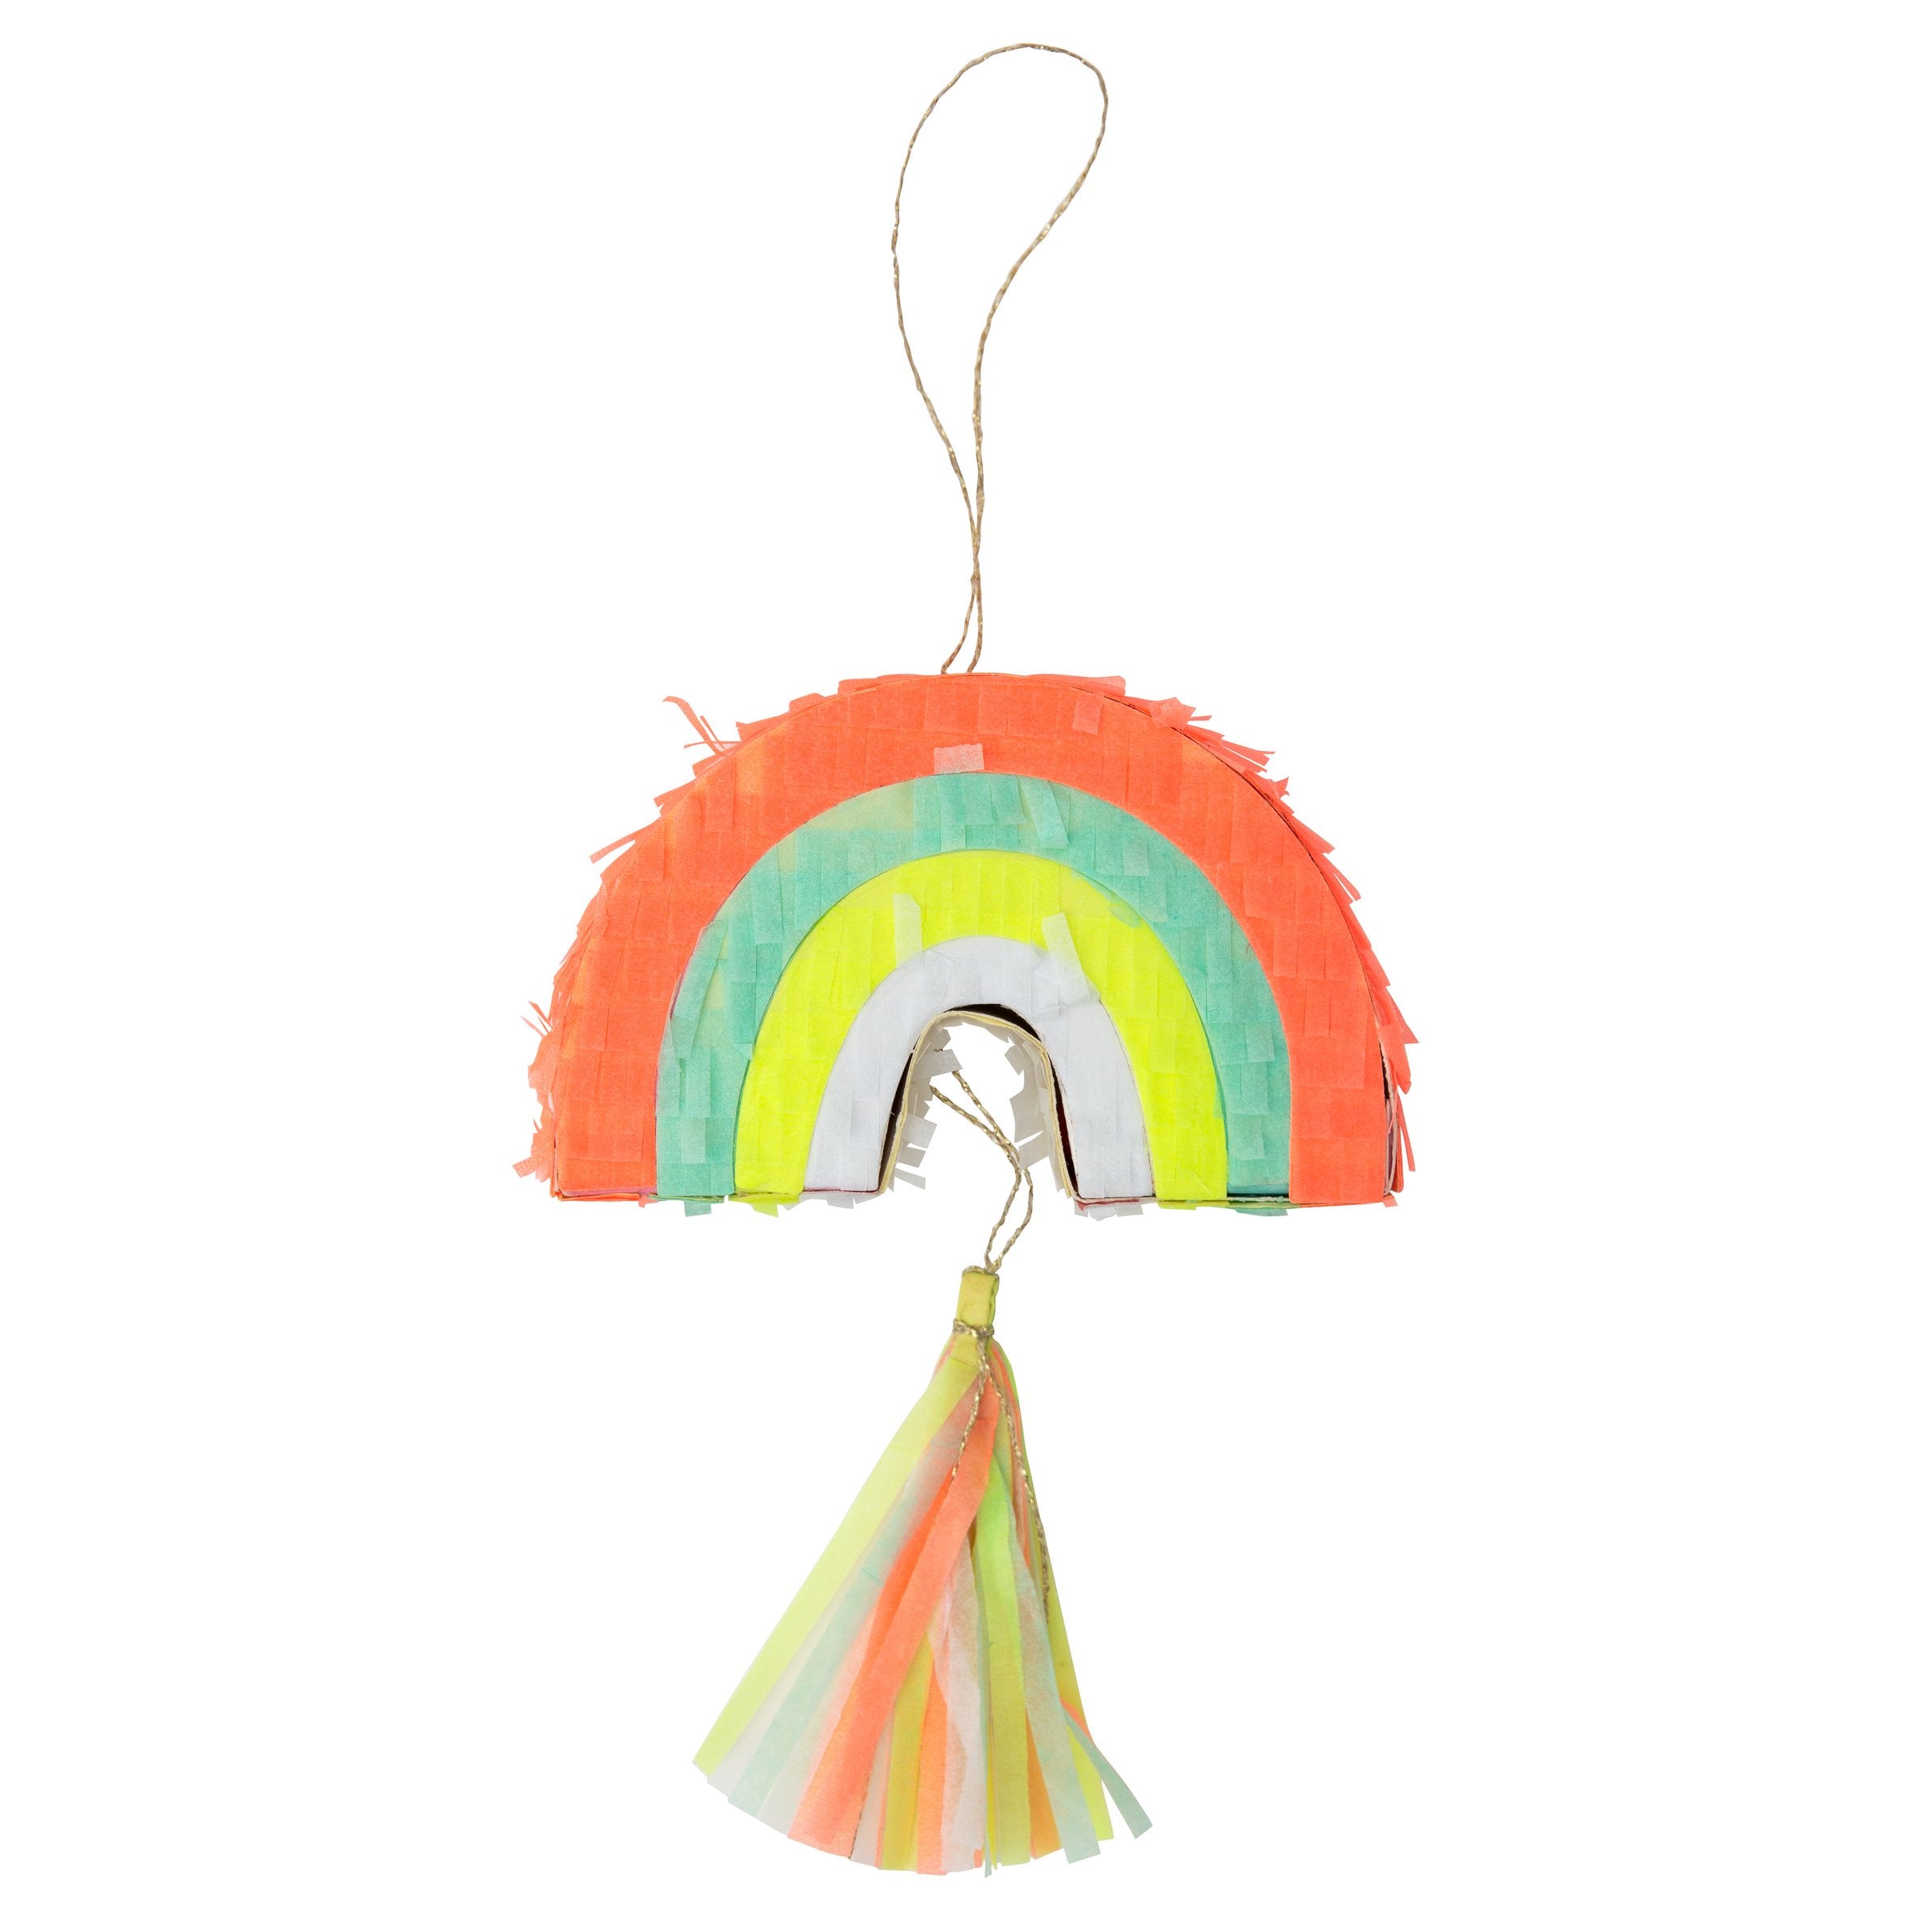 These mini pinatas, in the shape of a rainbow with a neon tassel, are filled with colourful confetti and temporary tattoos.